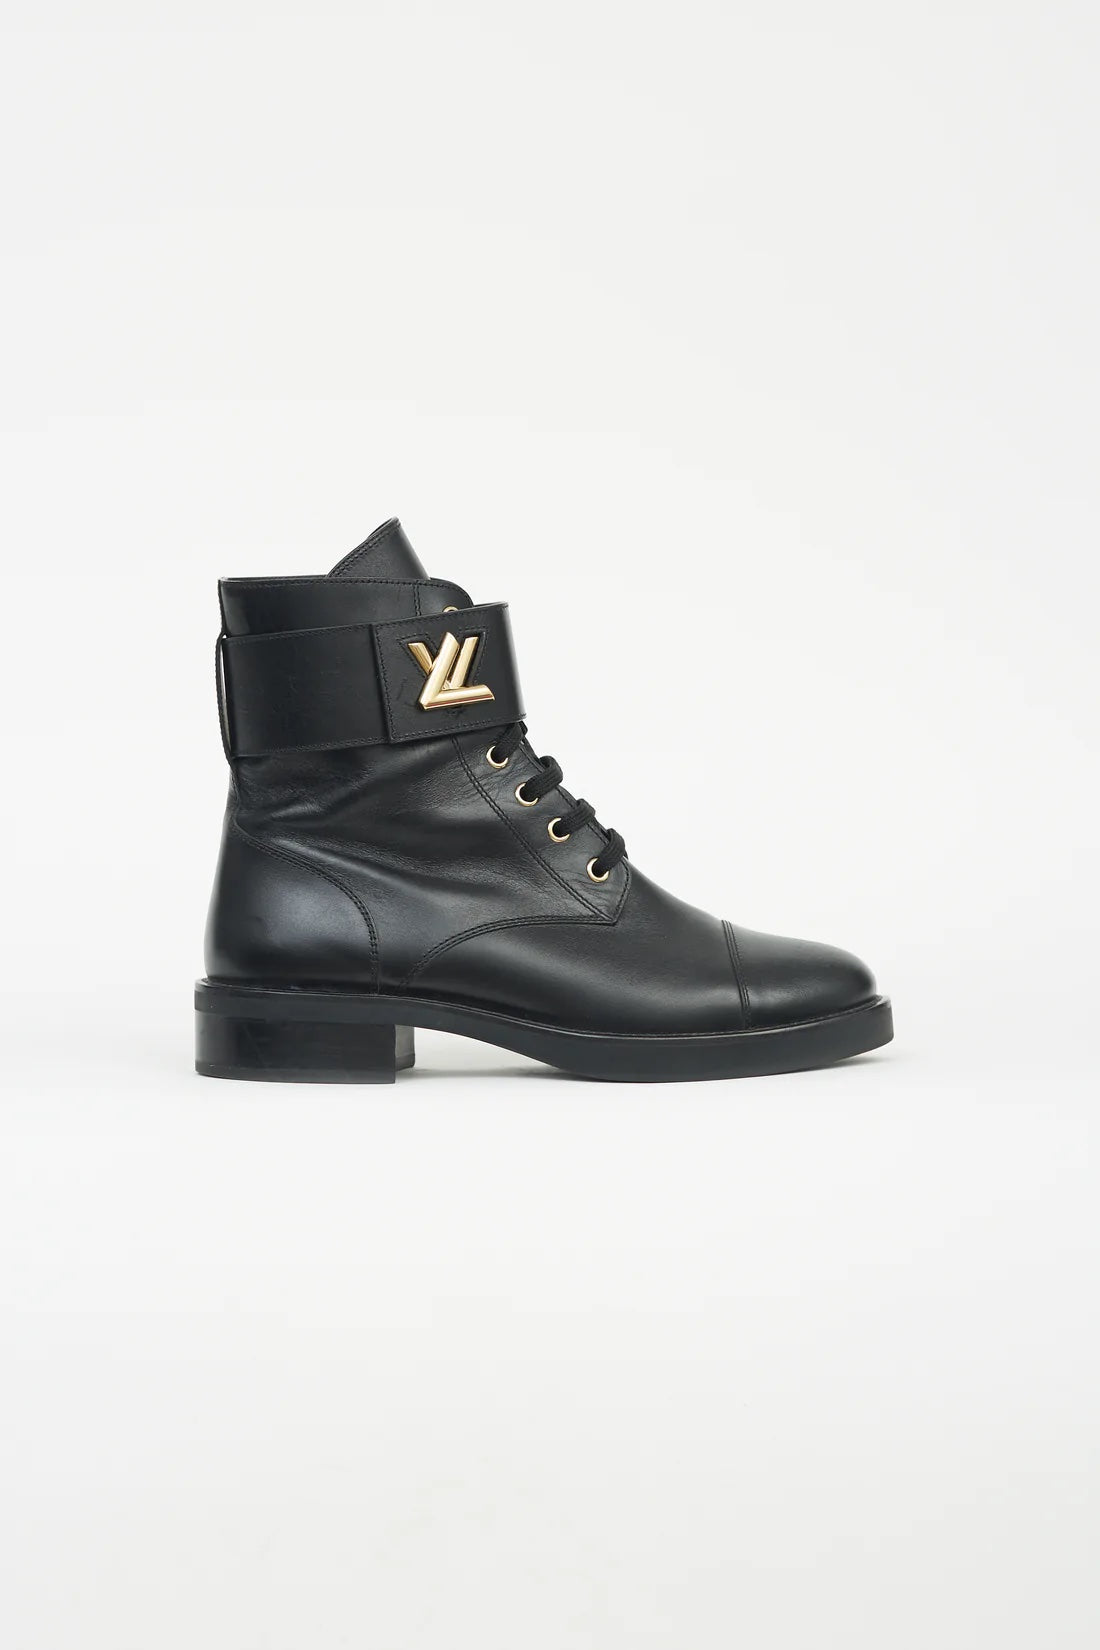 Louis Vuitton - Shearling Leather Lace Up Heel Ankle Boots Black 39